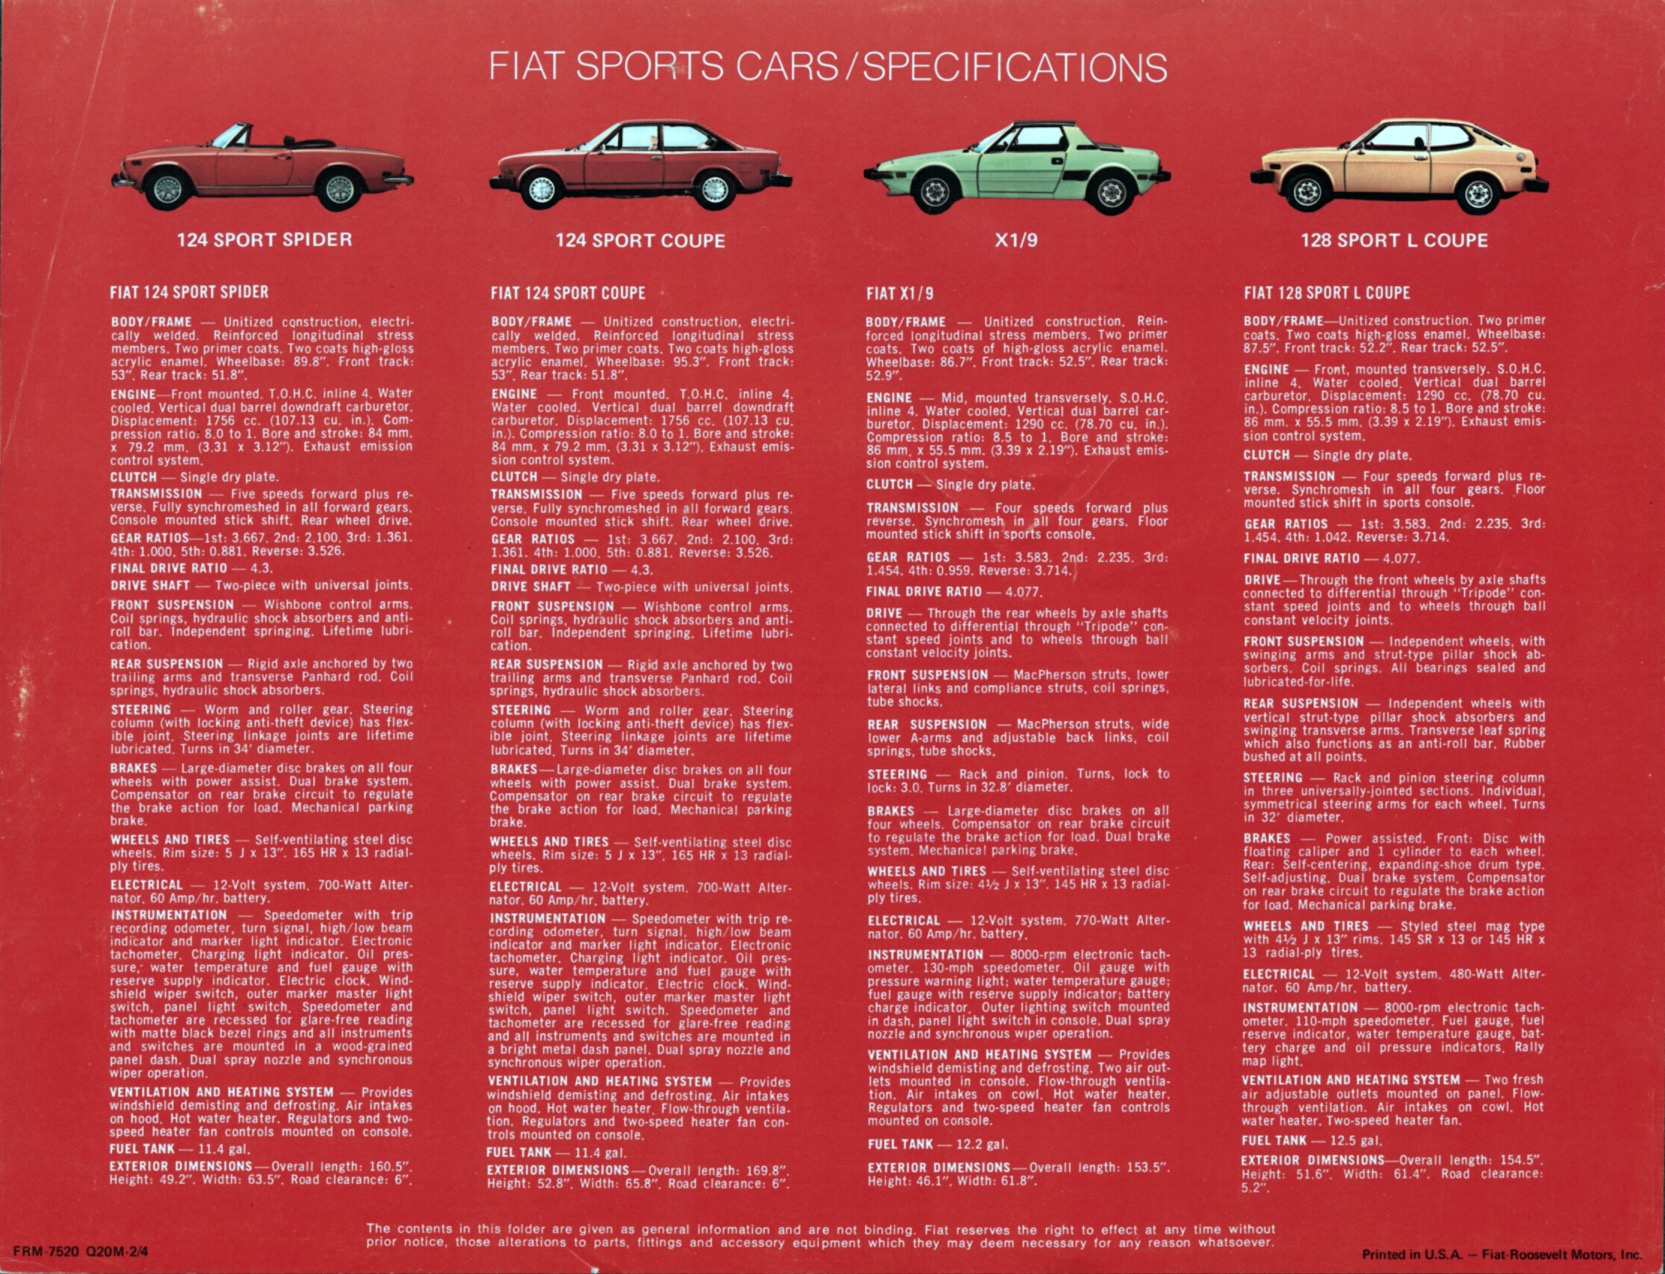 1974 Fiat Full-Line Brochure Page 1